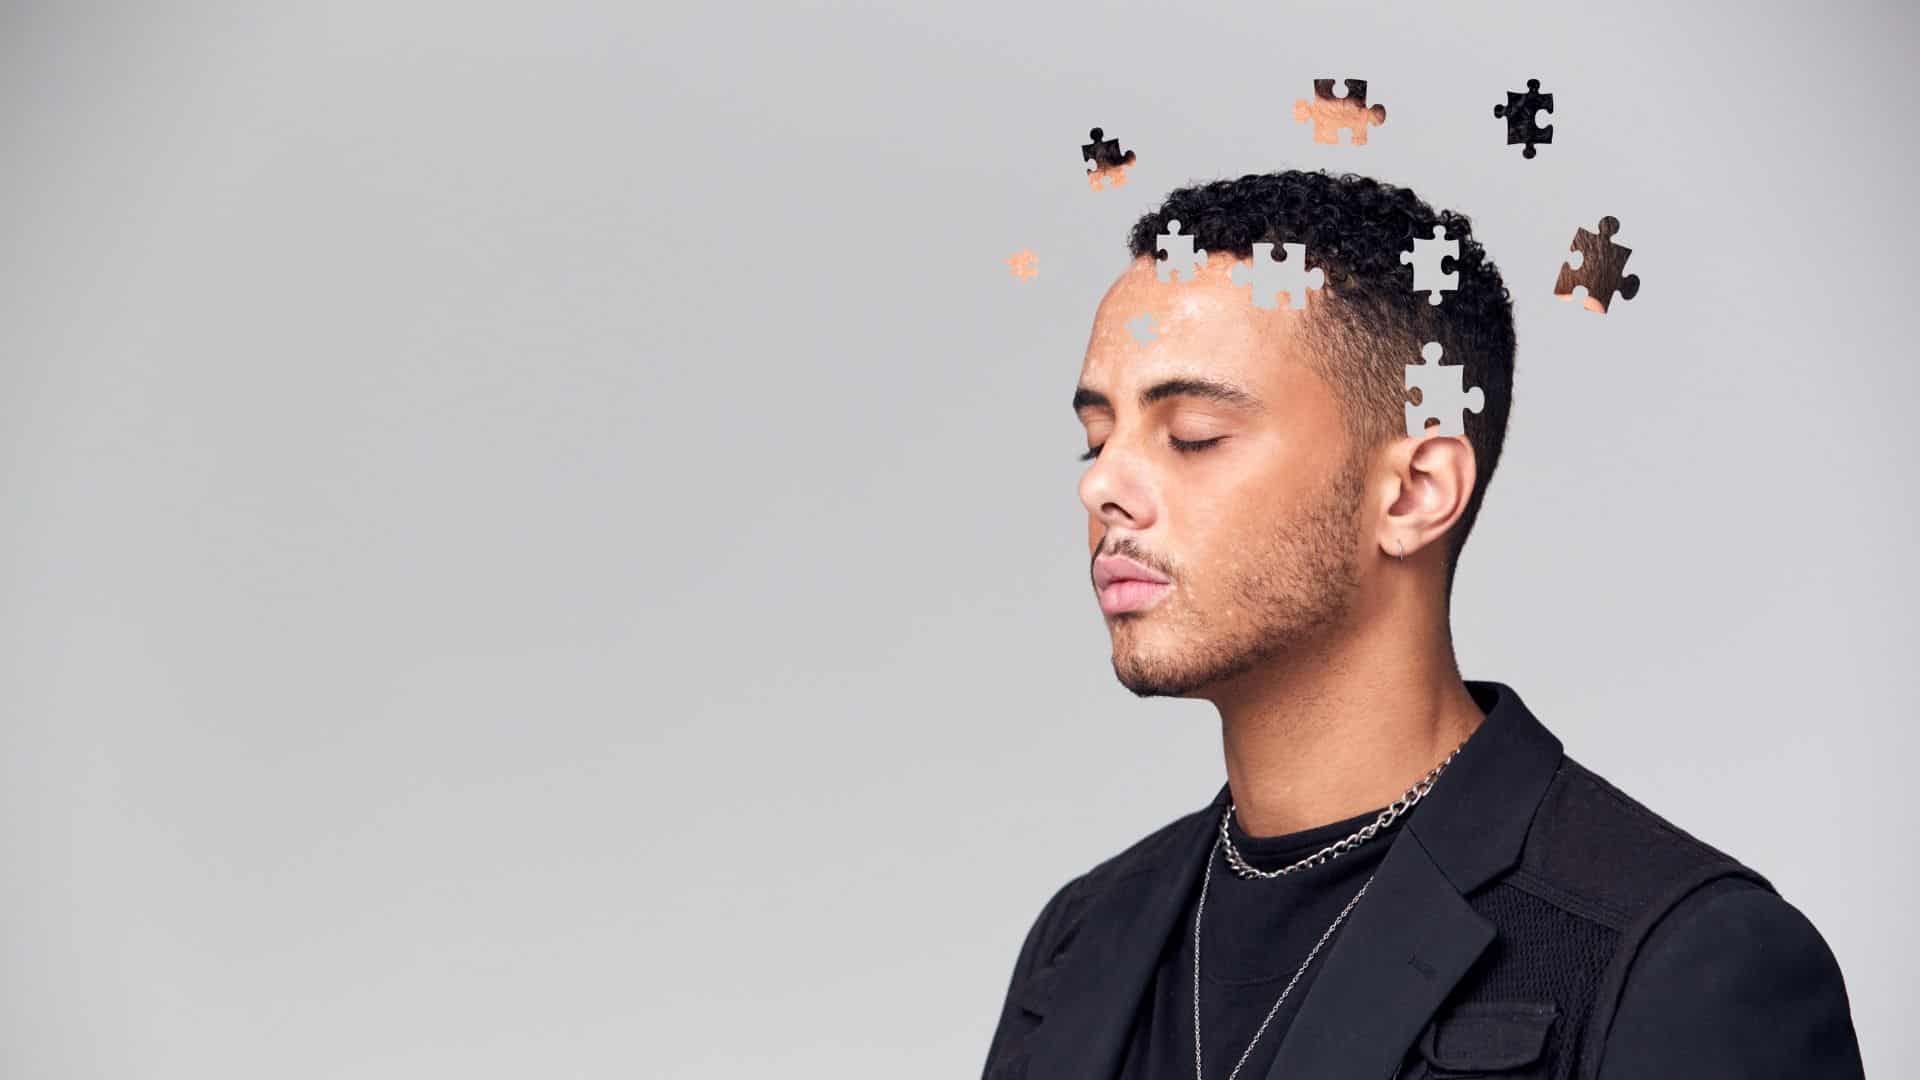 stock image showing a man with puzzle pieces coming out of his head